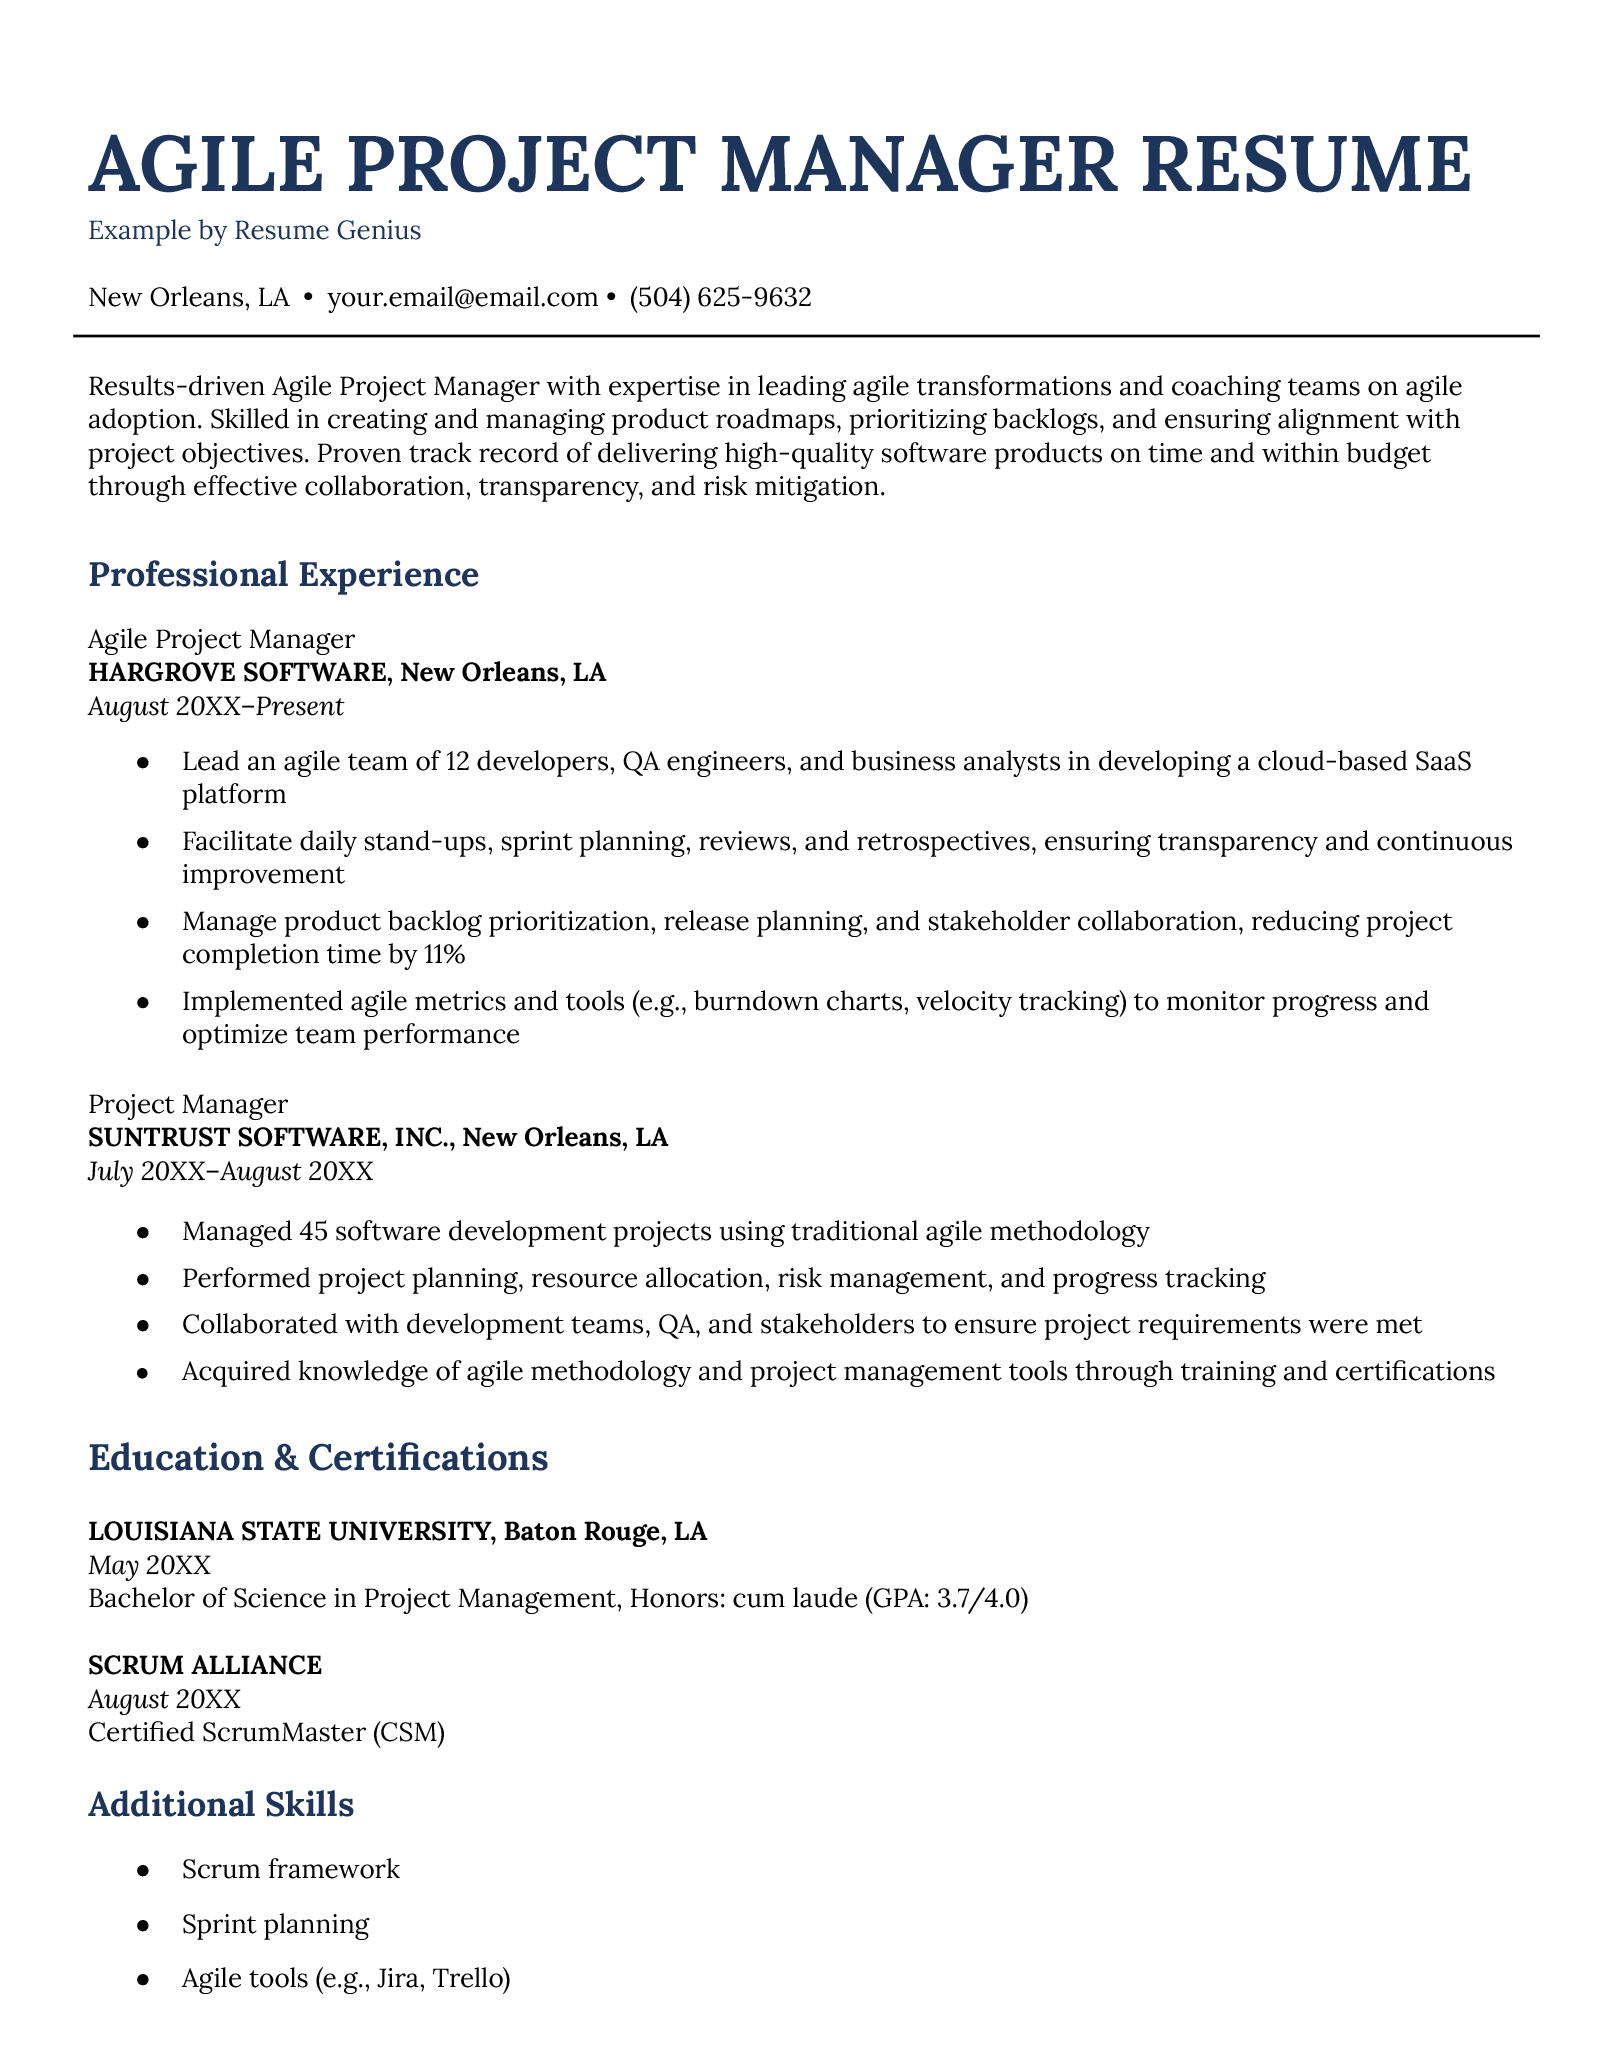 An example resume for an Agile Project Manager.